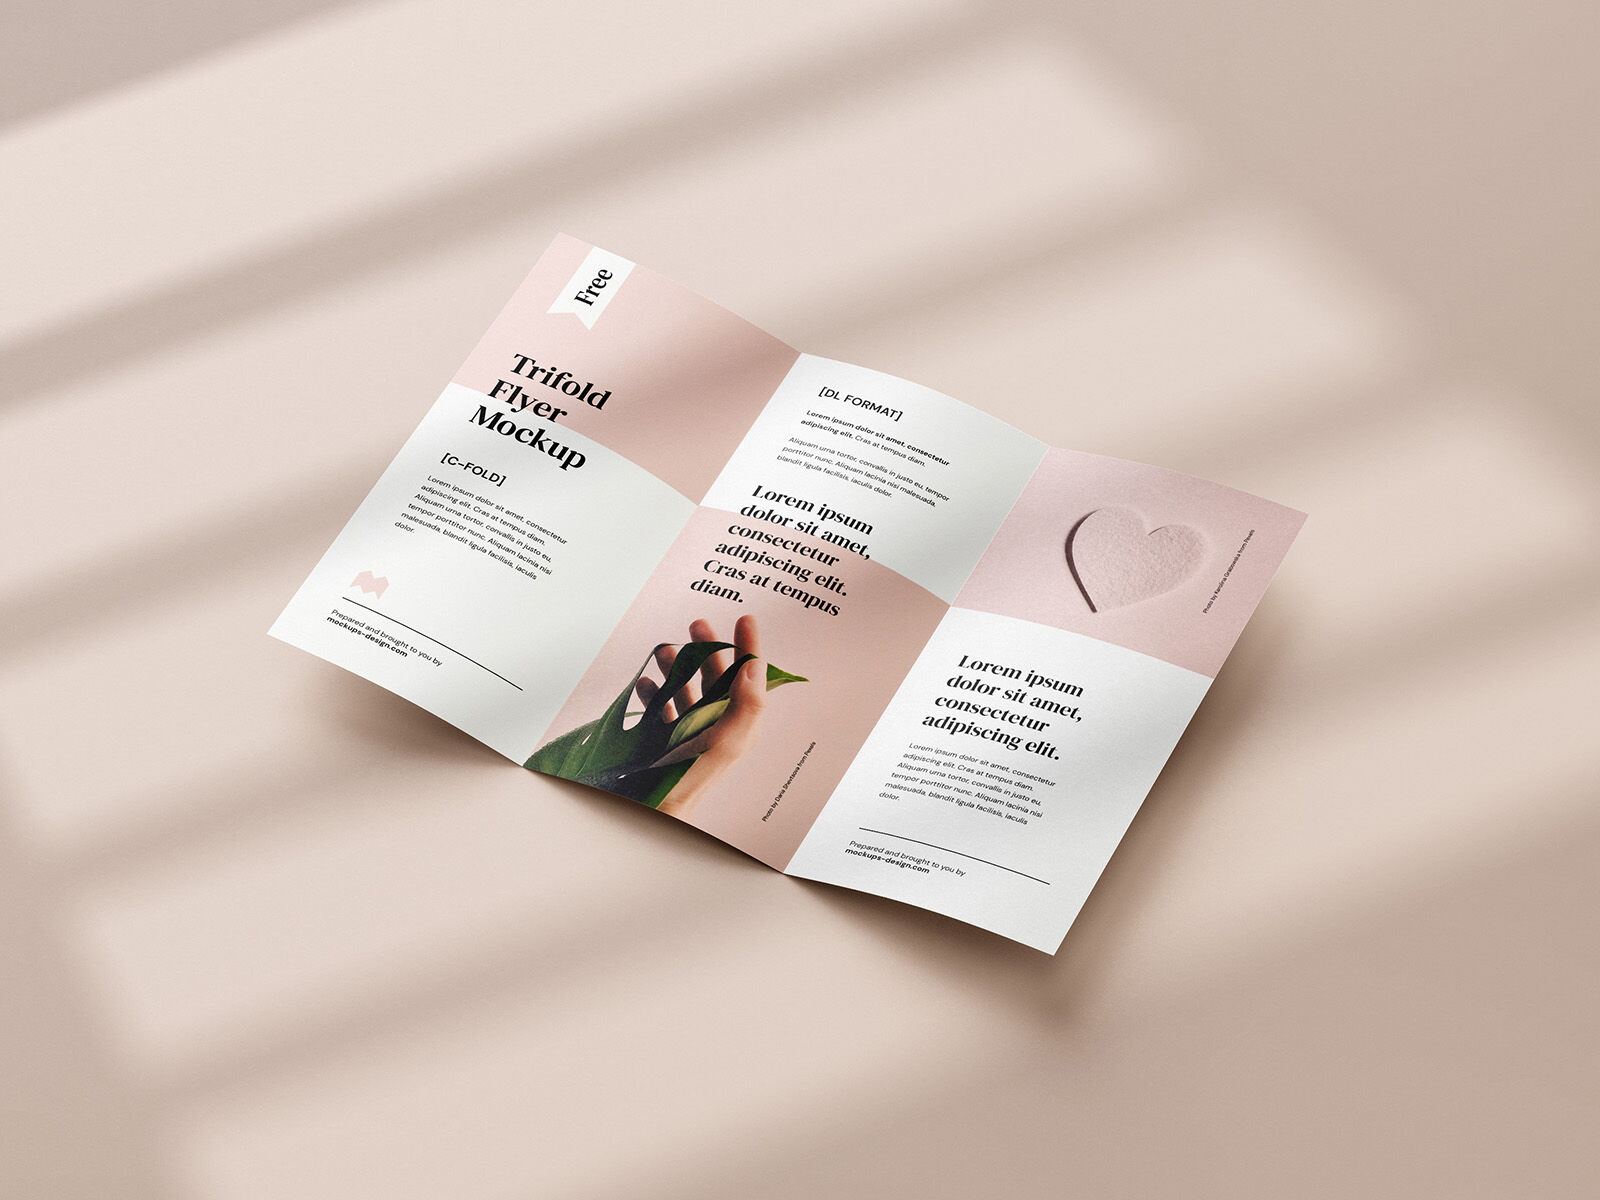 5 Mockups of Tri-fold DL Flyer in Different Shots FREE PSD